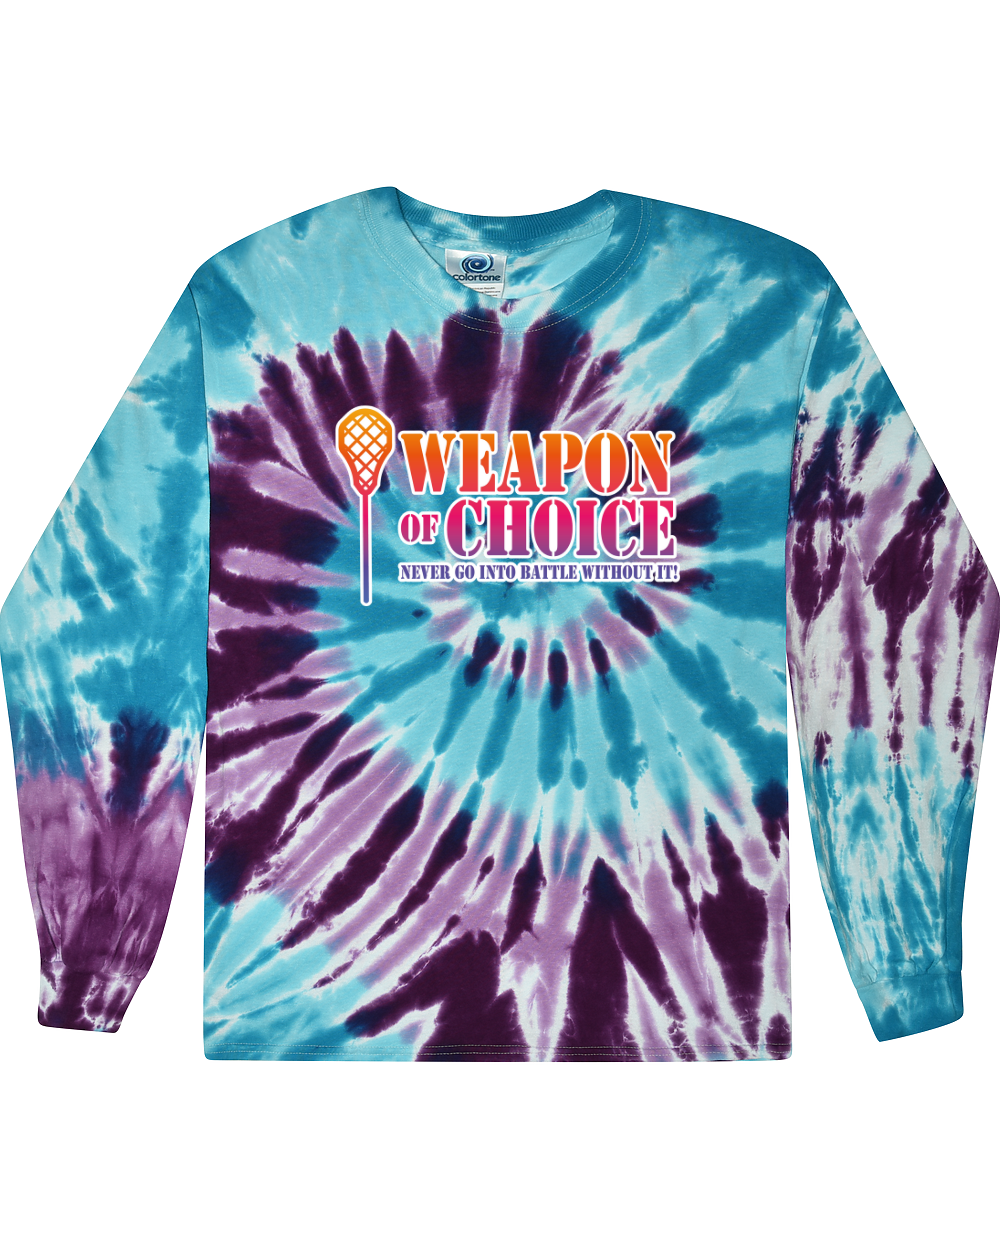 Weapon Of Choice Never Go Into Battle Without It! - Tie Dye Long Sleeve